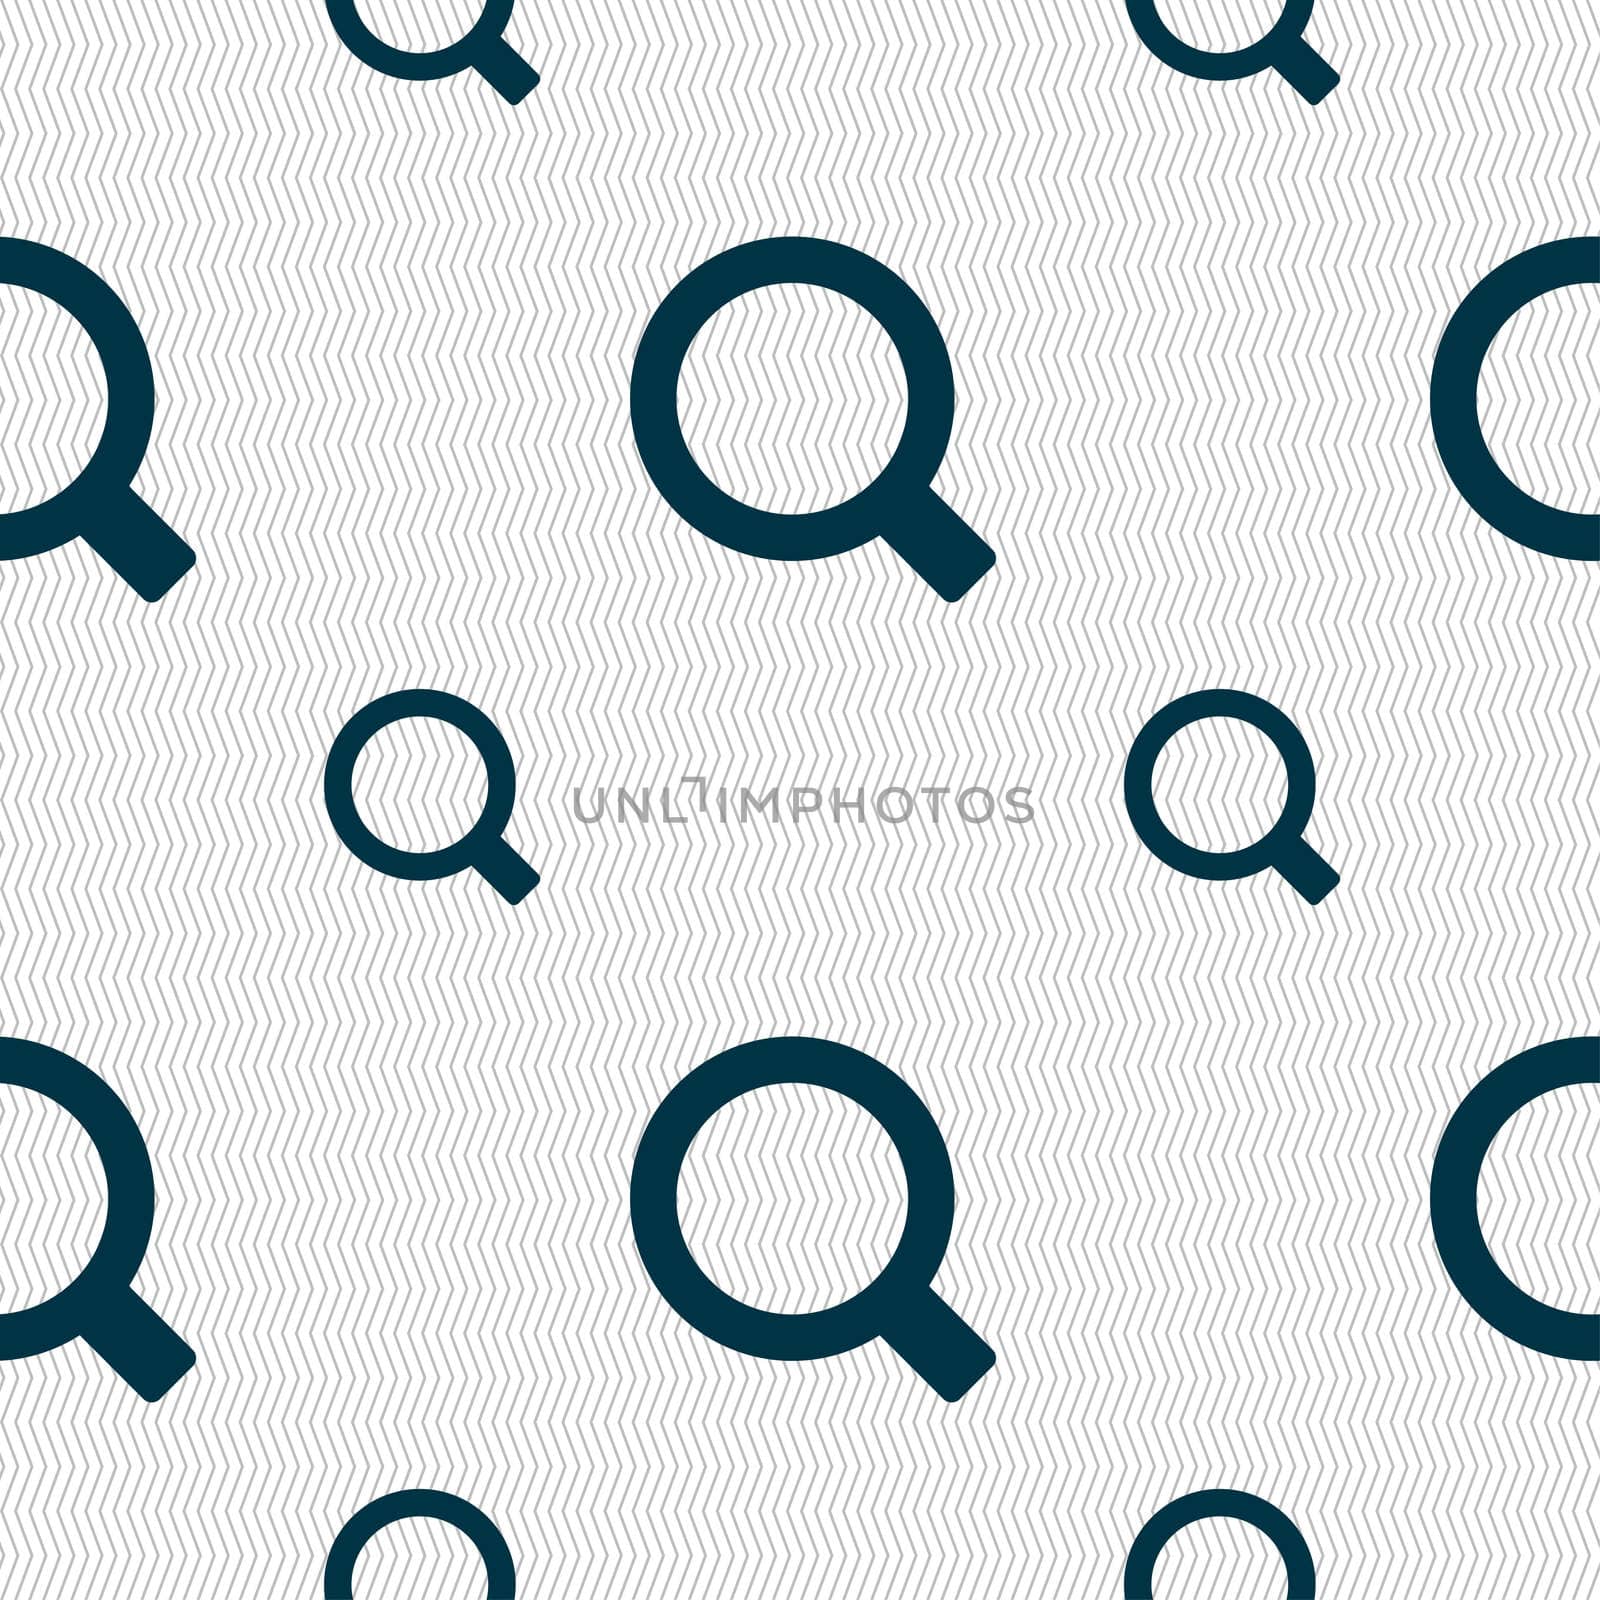 Magnifier glass icon sign. Seamless pattern with geometric texture. illustration